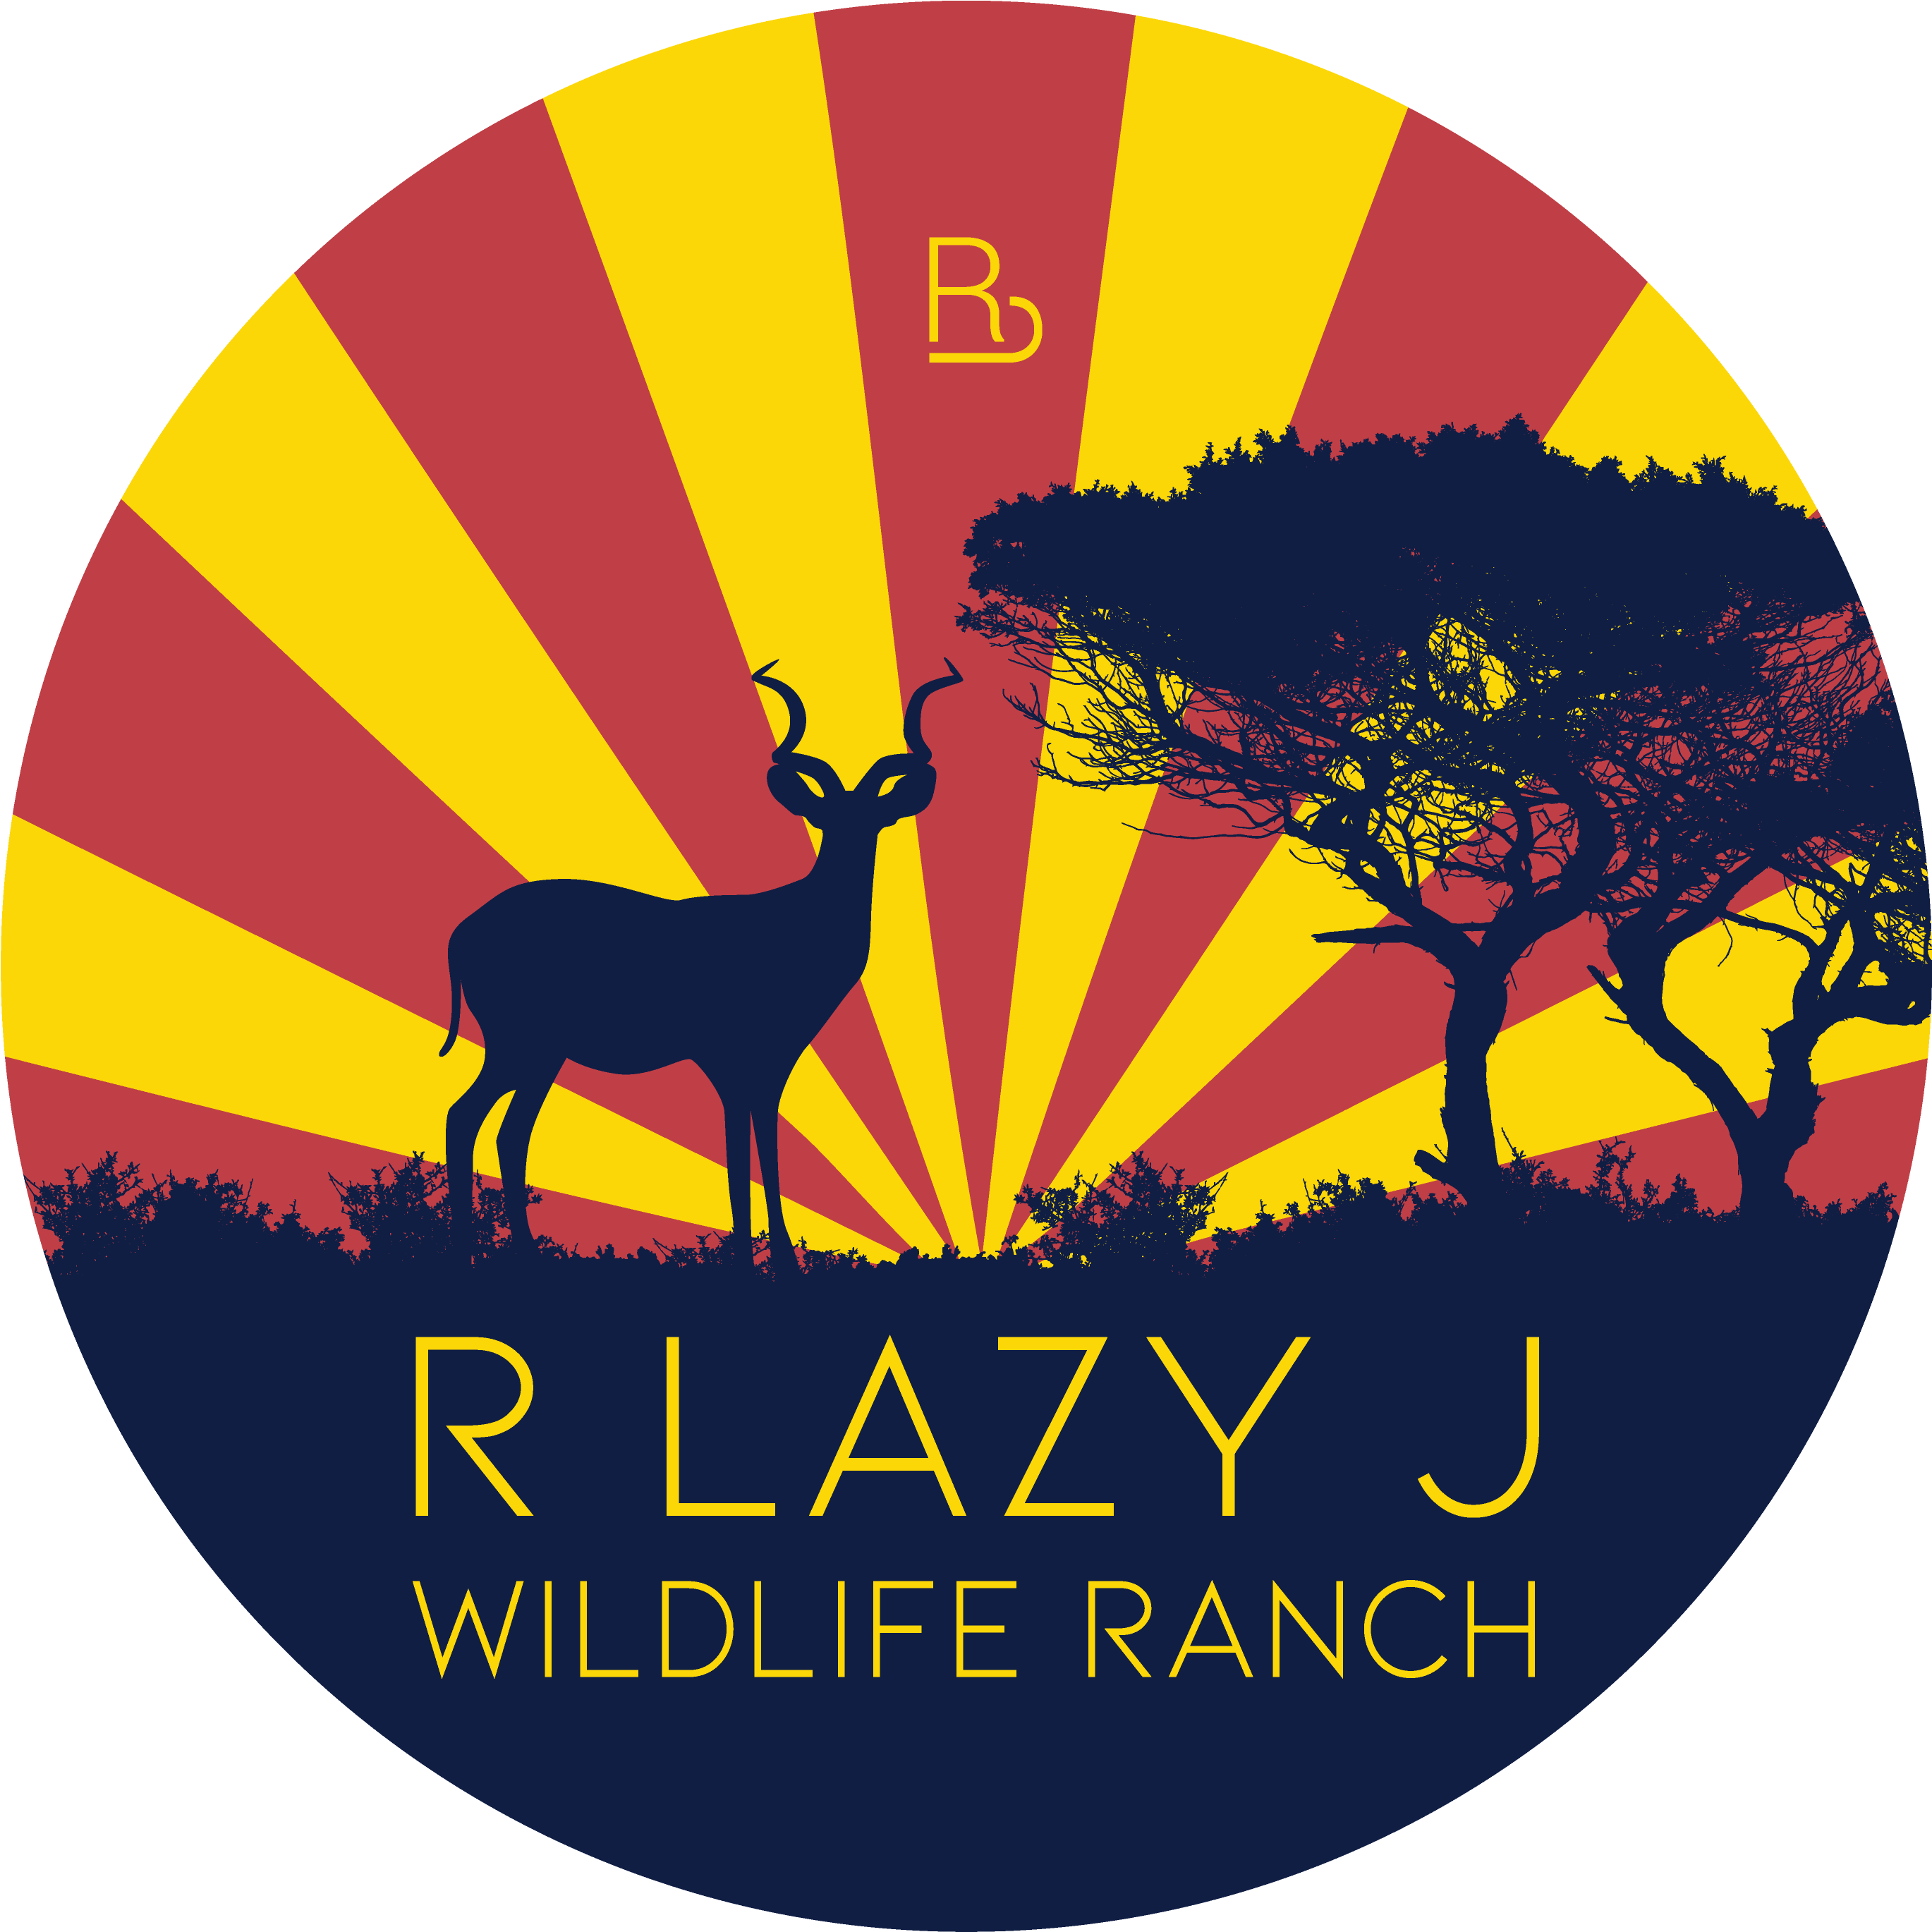 Wildlife Ranch Focused On Conservation In Eagar, Az - R Lazy J Wildlife Ranch (2846x2819), Png Download